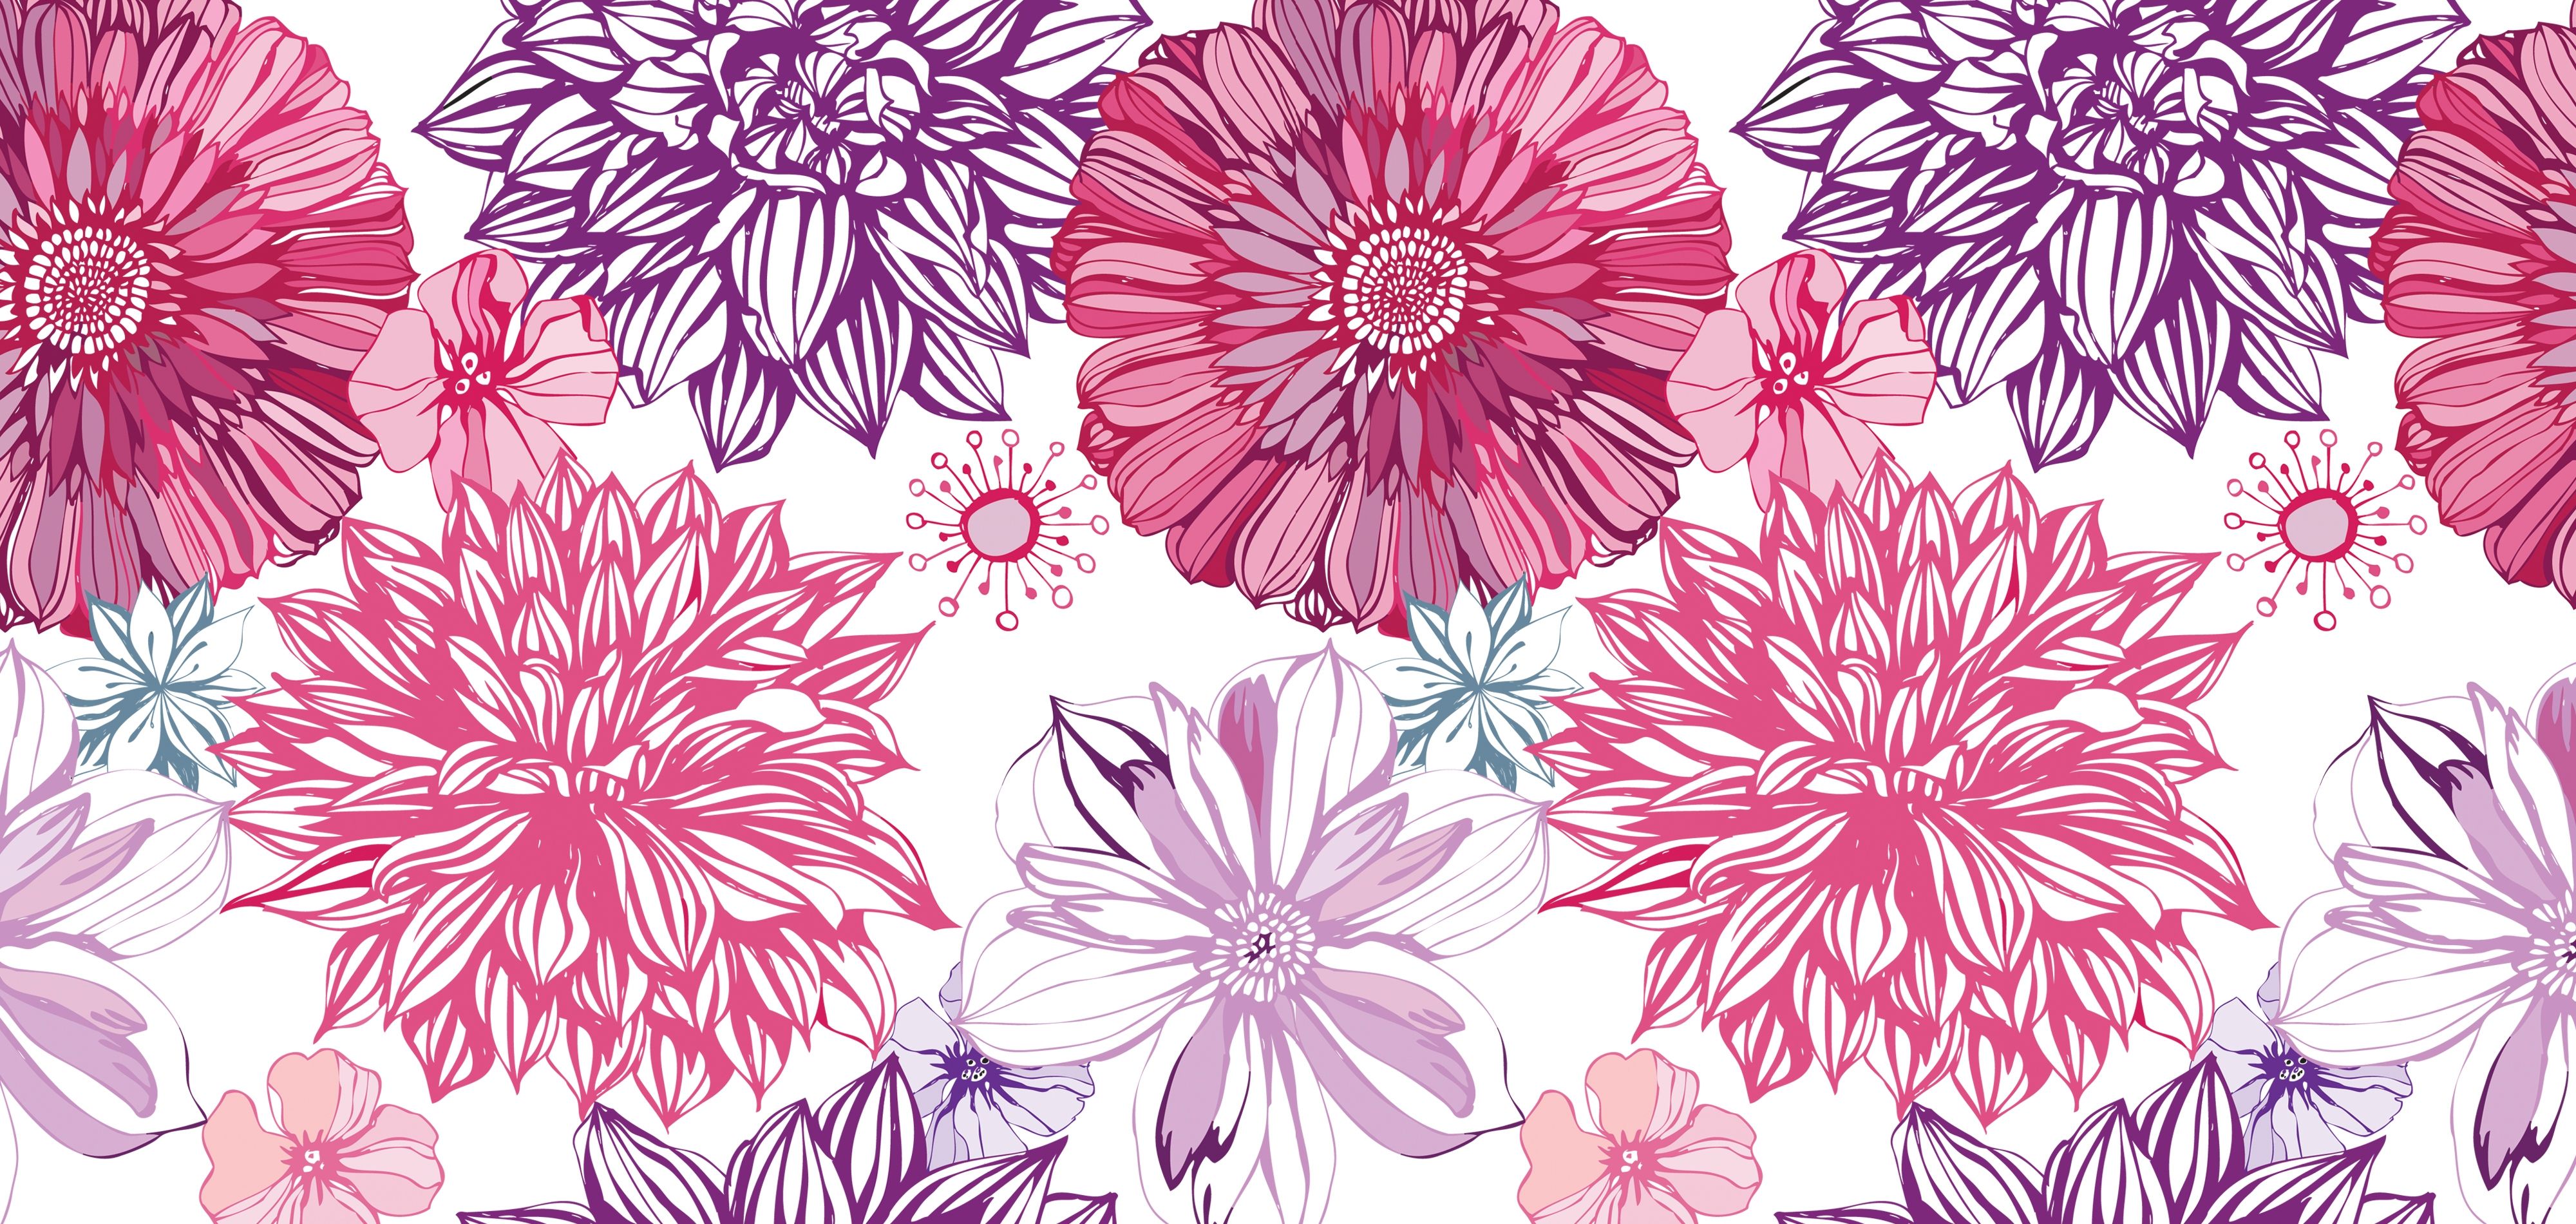 Wallpaper, asters, patterns, background, surface, texture